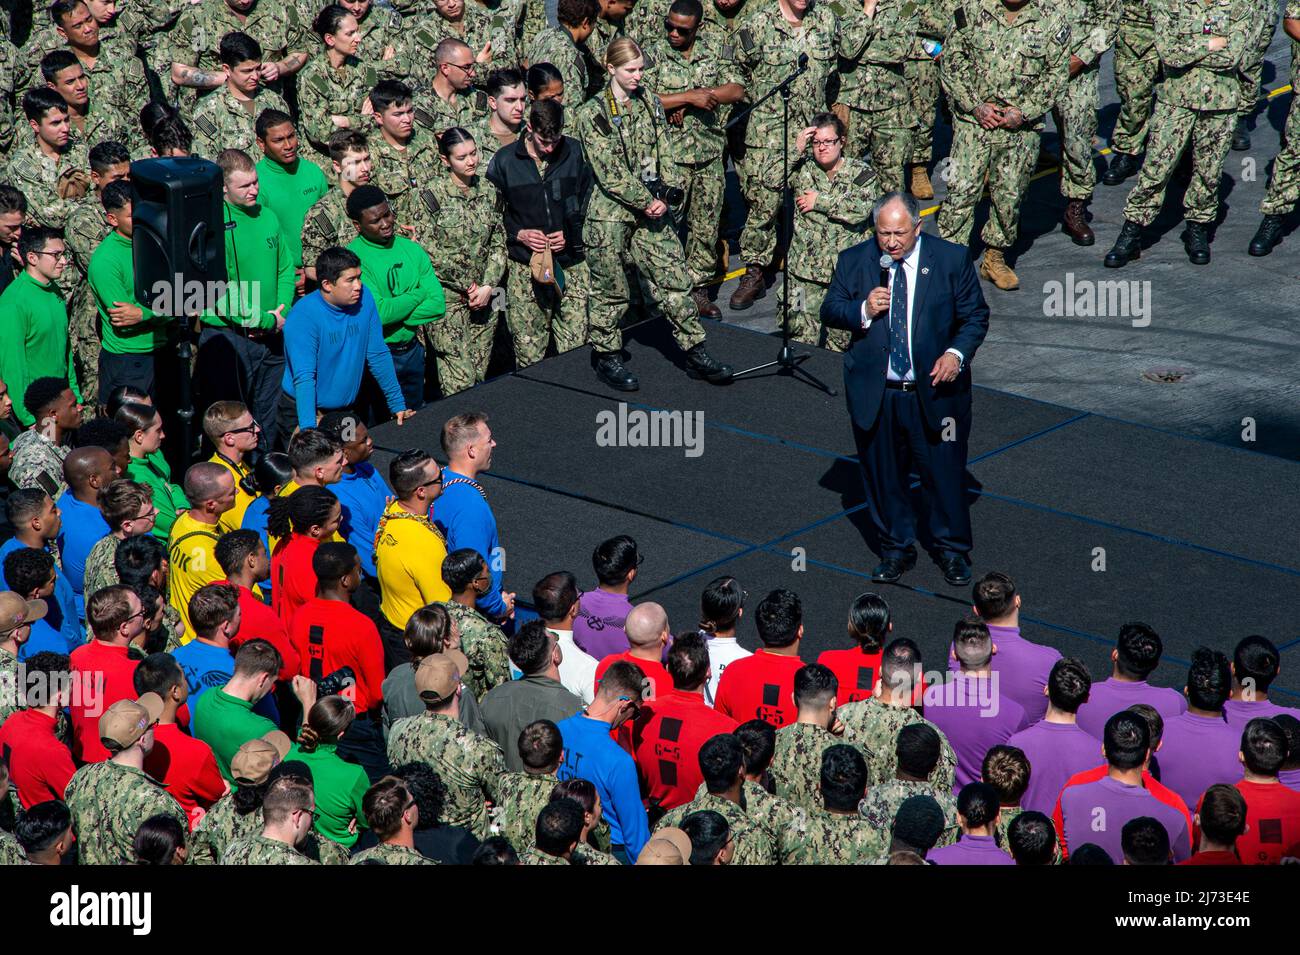 San Diego, United States. 04 May, 2022. U.S. Secretary of the Navy Carlos Del Toro addresses an All Hands meeting on the flight deck of Nimitz-class aircraft carrier USS Carl Vinson, May 4, 2022 in San Diego, California.  Credit: MC2 Tyler Wheaton/US Navy/Alamy Live News Stock Photo